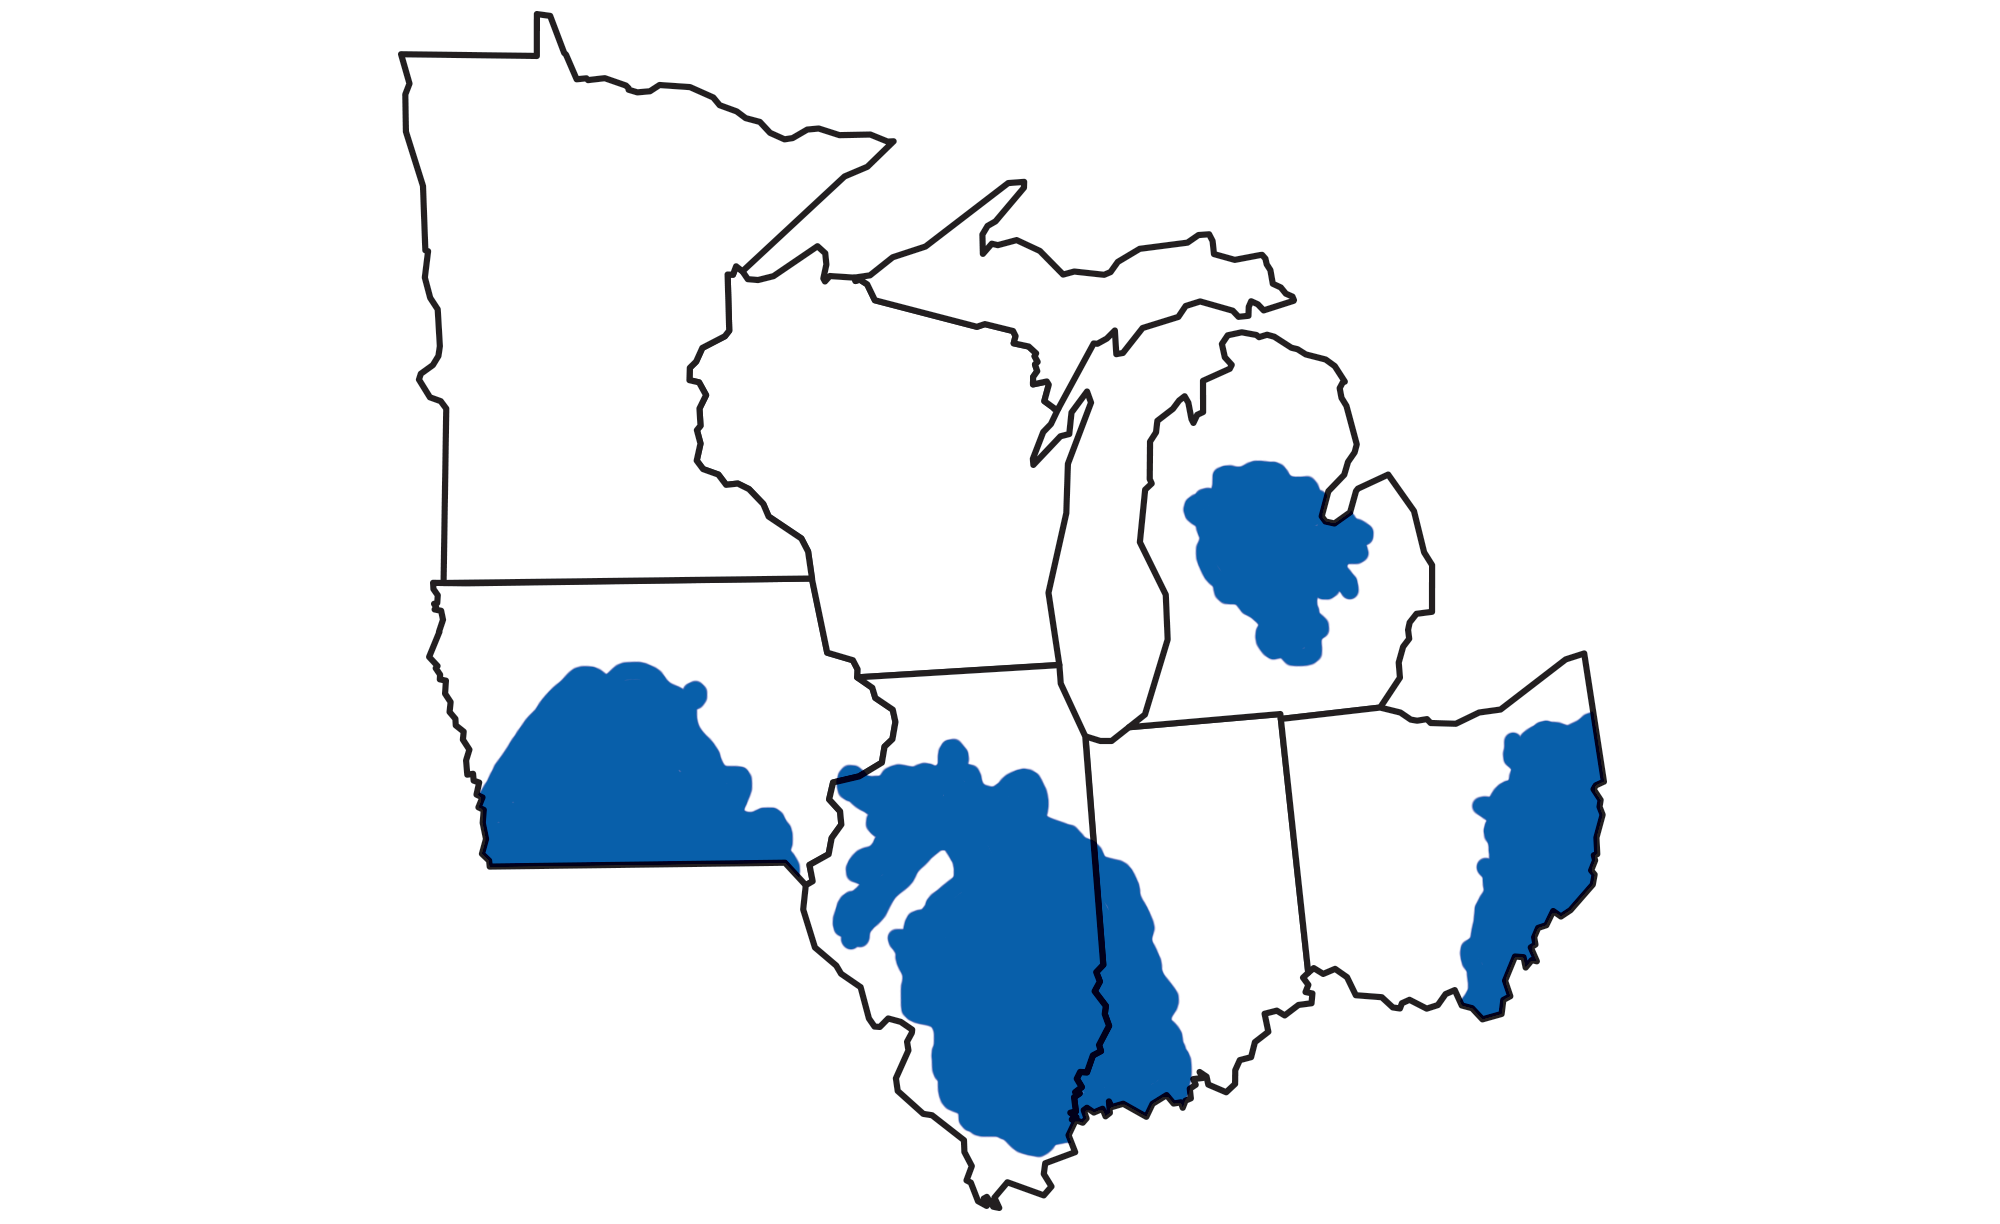 Map of the midwestern United States with state borders outlined in black. Coal deposits are shaded blue. Deposits are found in southern Iowa, much of Illinois, southwestern Indiana, the Lower Peninsula of Michigan, and eastern Ohio.